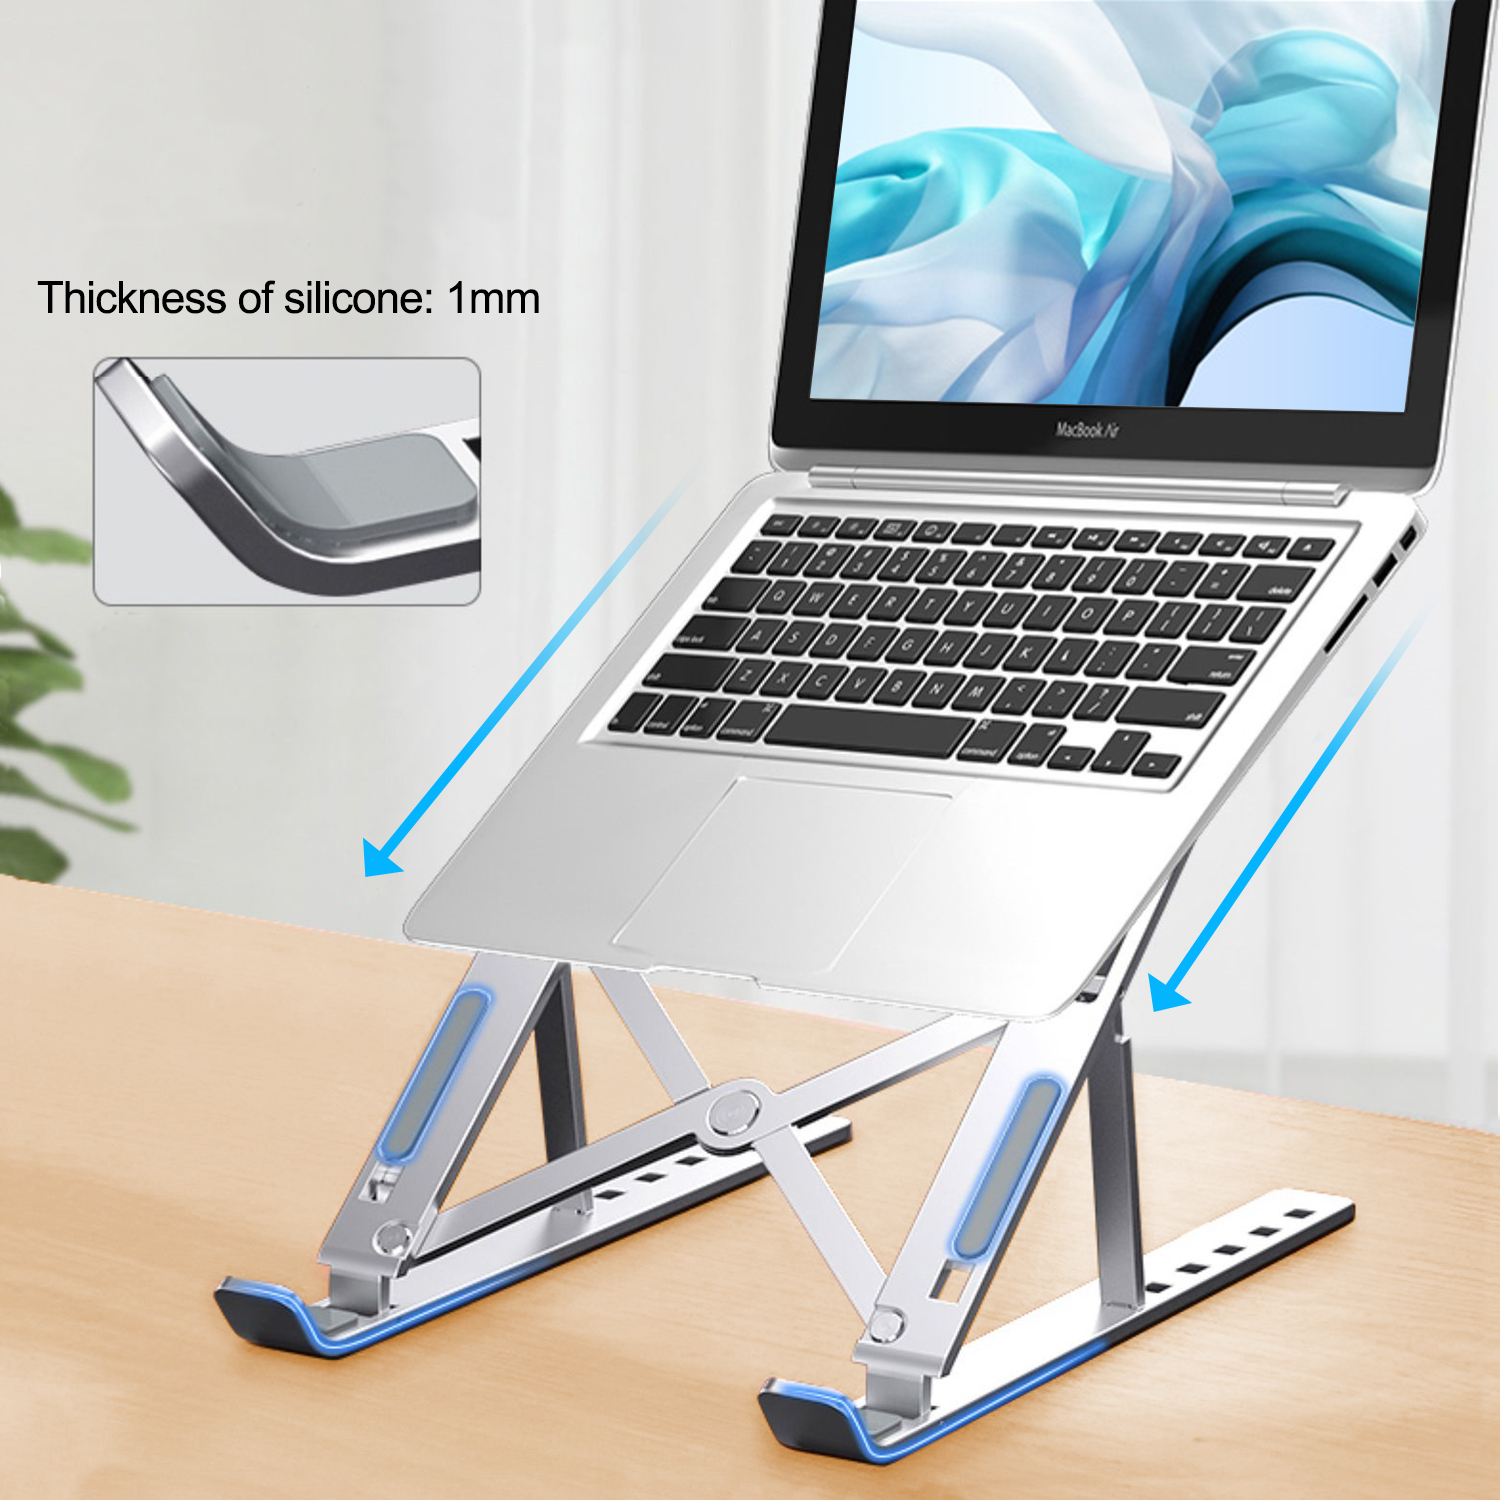 Miuzei Laptop Stand Adjustable Laptop Stand for Desk Silver Notebook Holder Stand Support MacBook Air Pro,HP,Lenovo More 8-15.6 Laptops & Tablet Laptop Riser Aluminum Foldable Computer Stand 